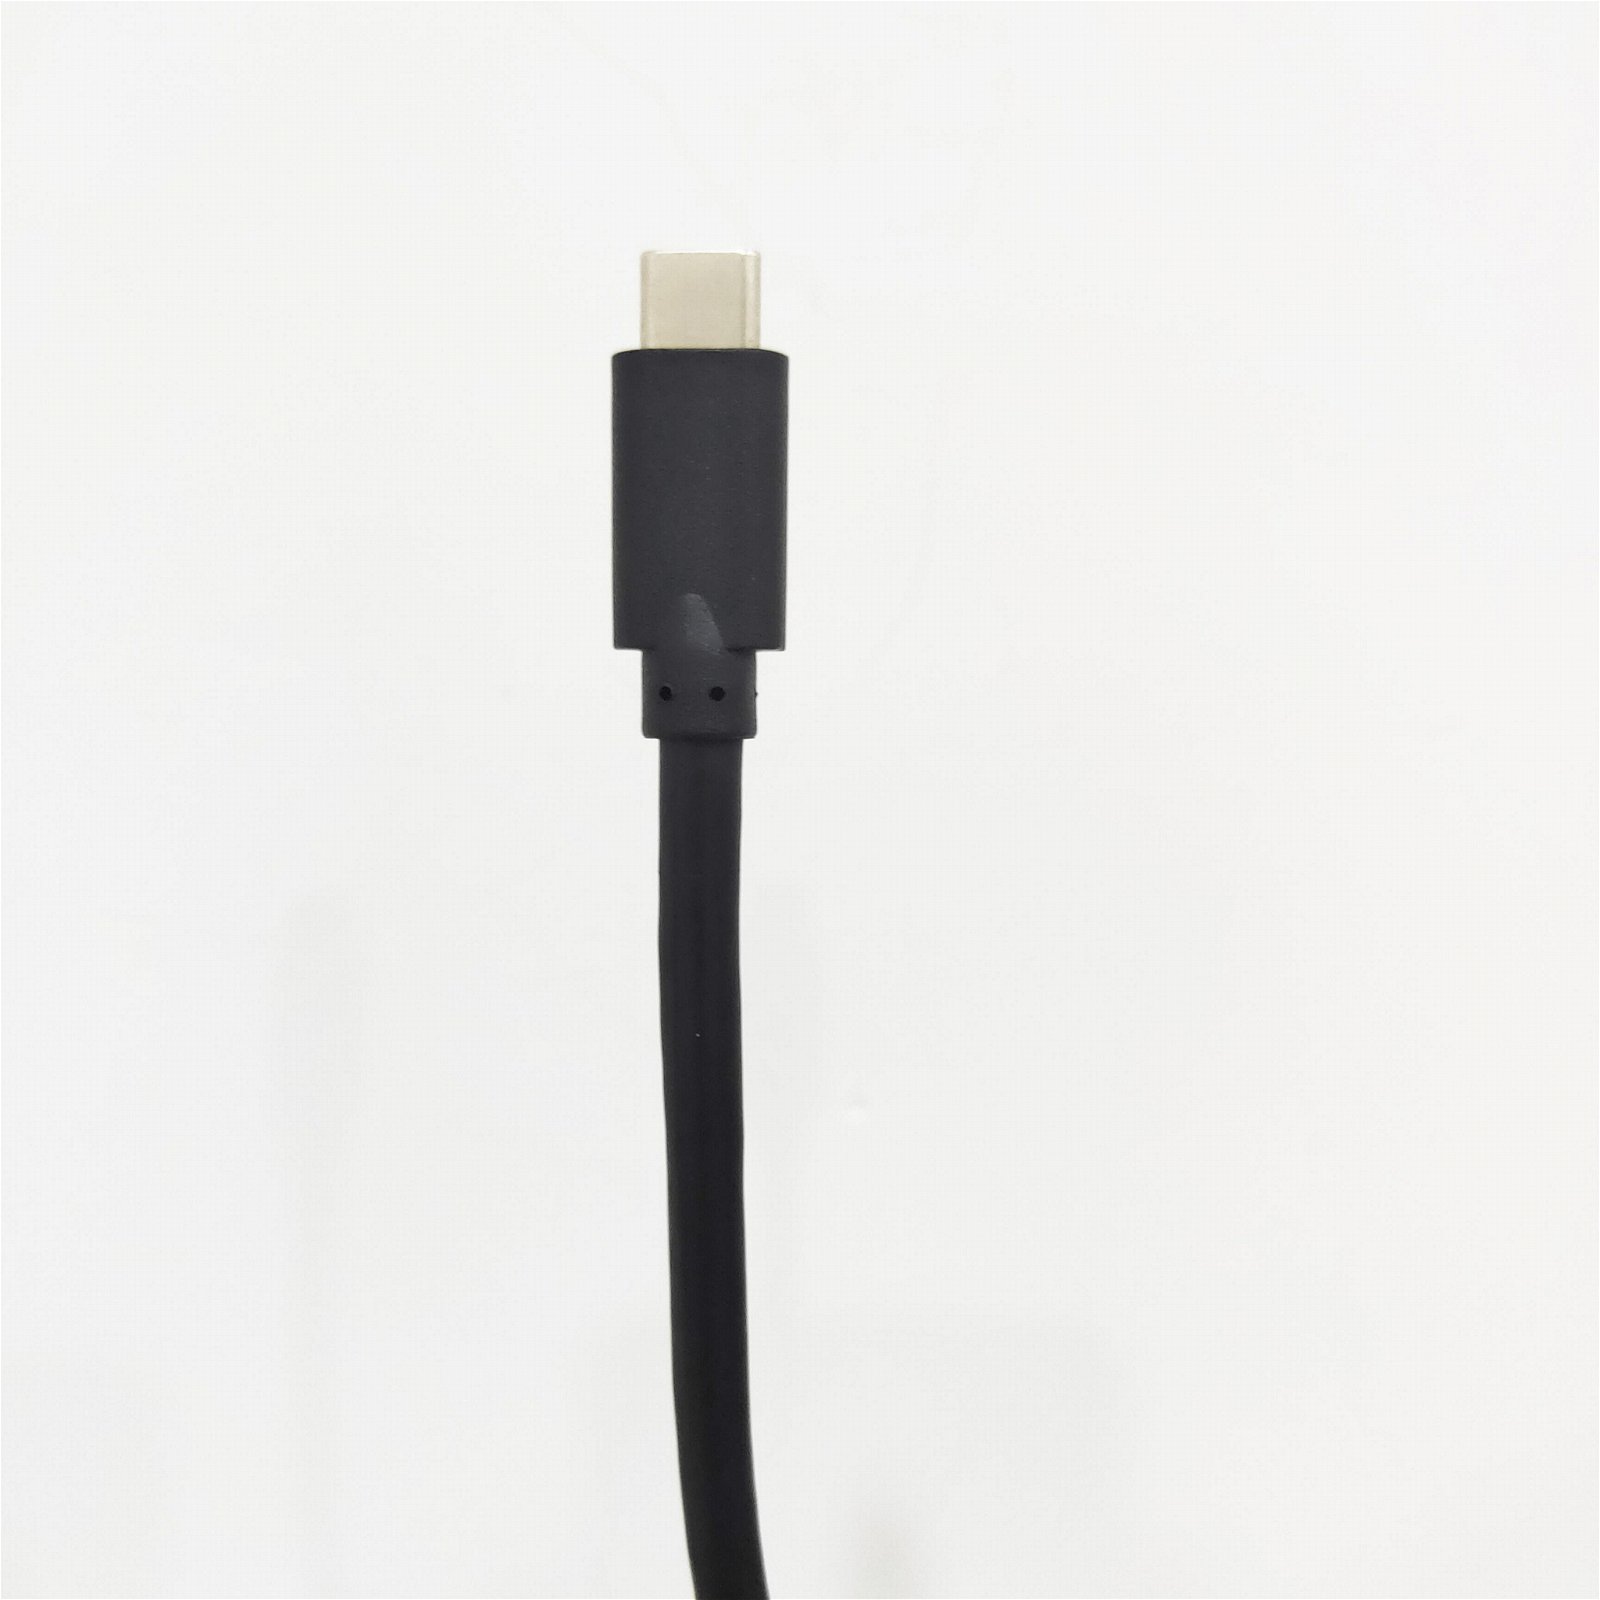 USB-C to USB A Cable Data Transfer Braied USB 3.1 to USB 2.0 A Cable 4